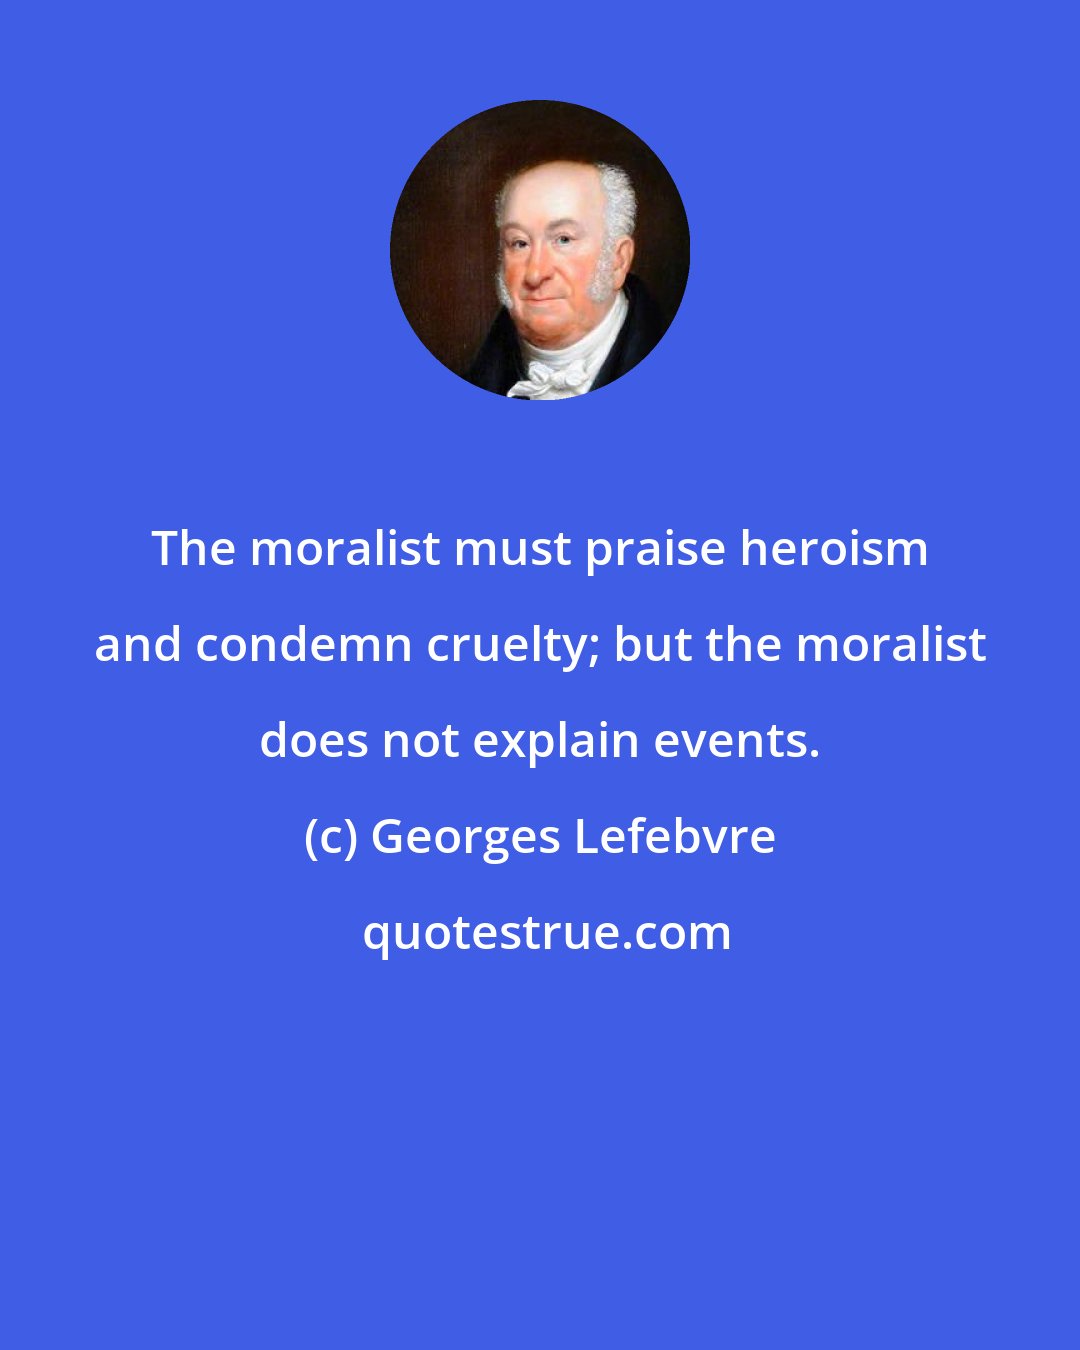 Georges Lefebvre: The moralist must praise heroism and condemn cruelty; but the moralist does not explain events.